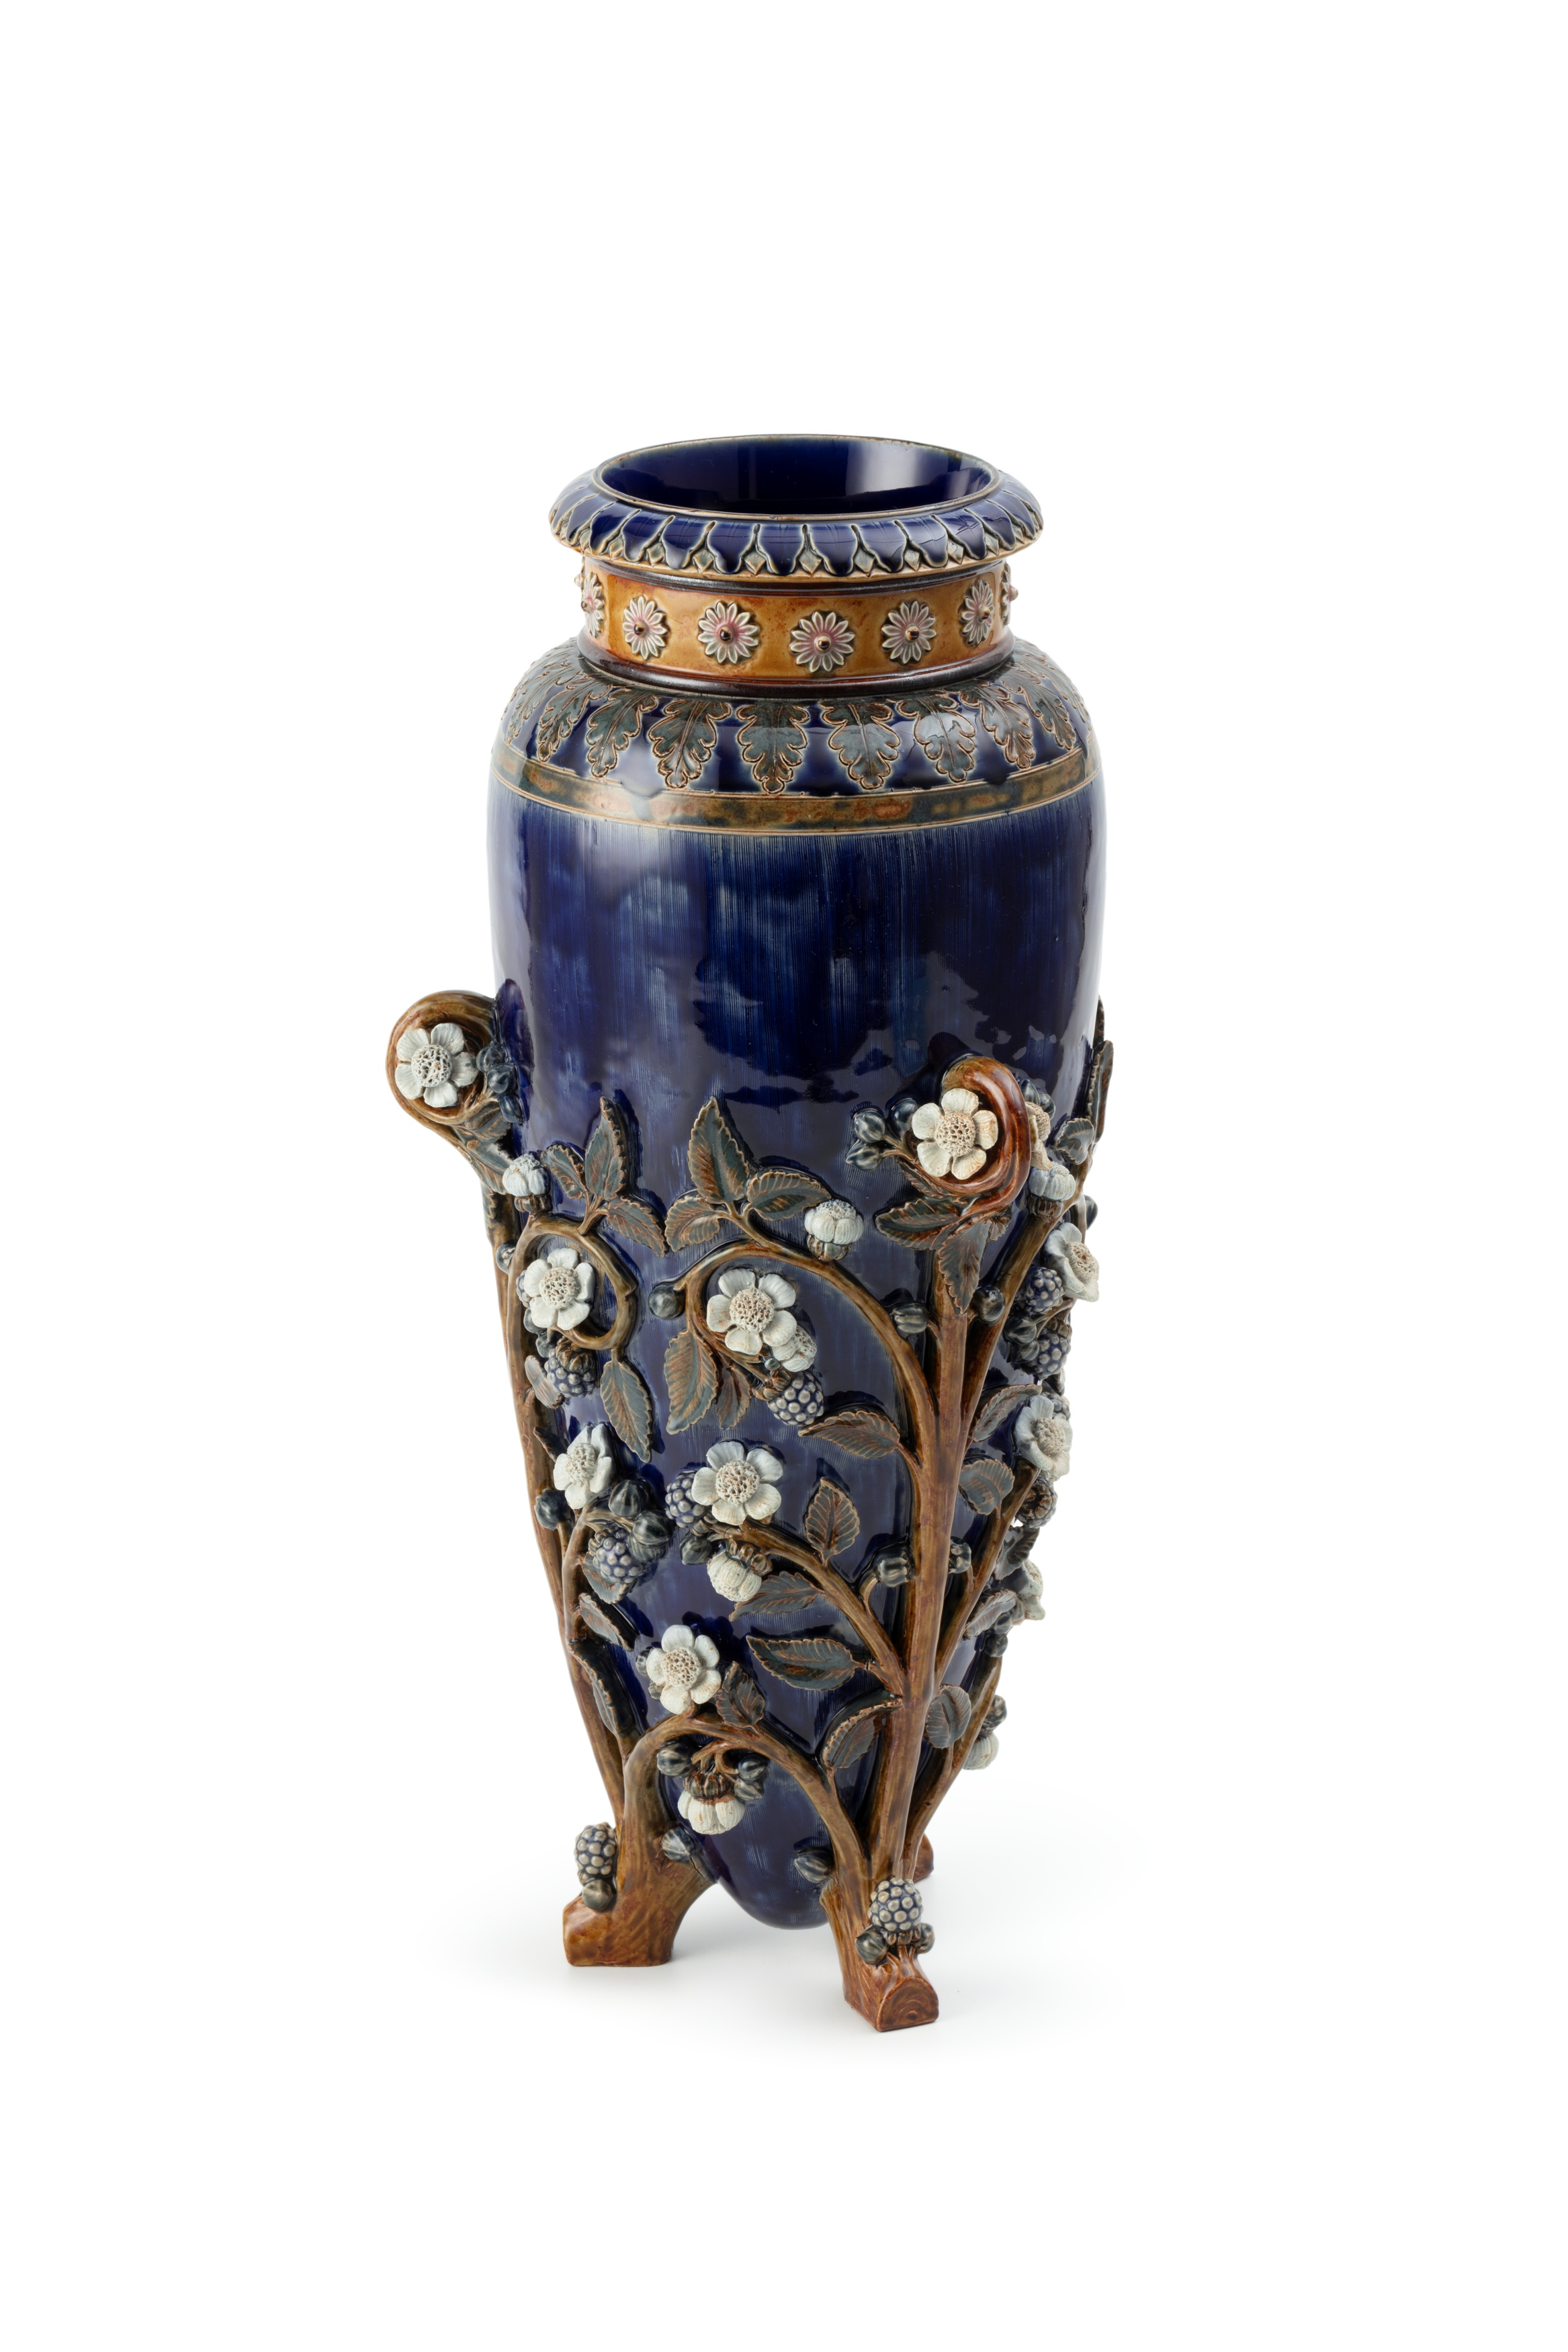 'Blackberries' vase by Doulton and Co